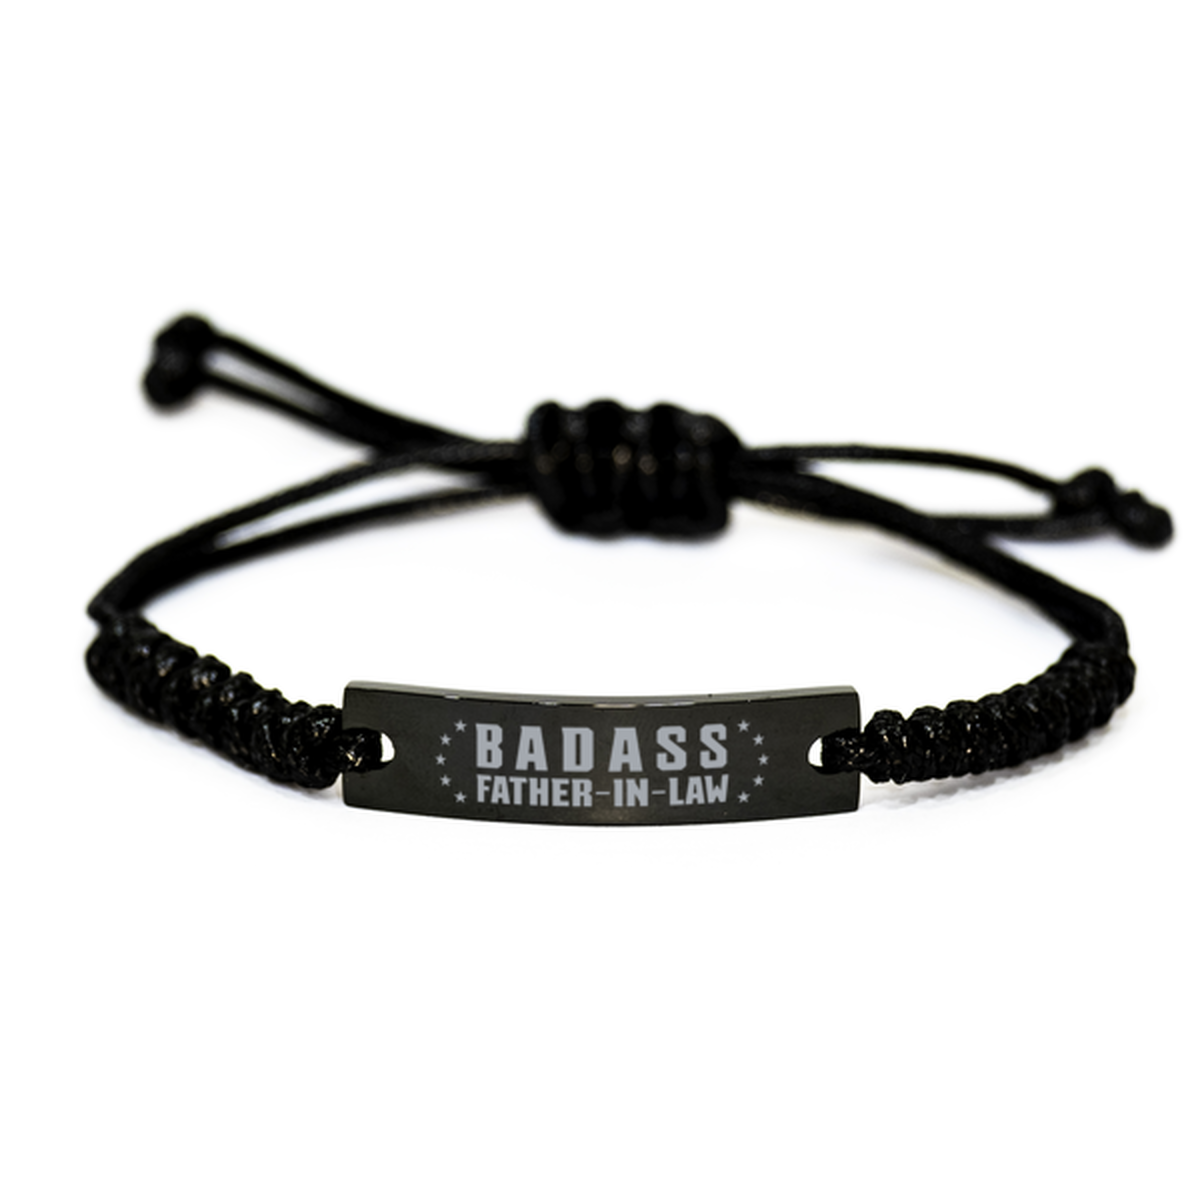 Father-in-law Rope Bracelet, Badass Father-in-law, Funny Family Gifts For Father-in-law From Son Daughter